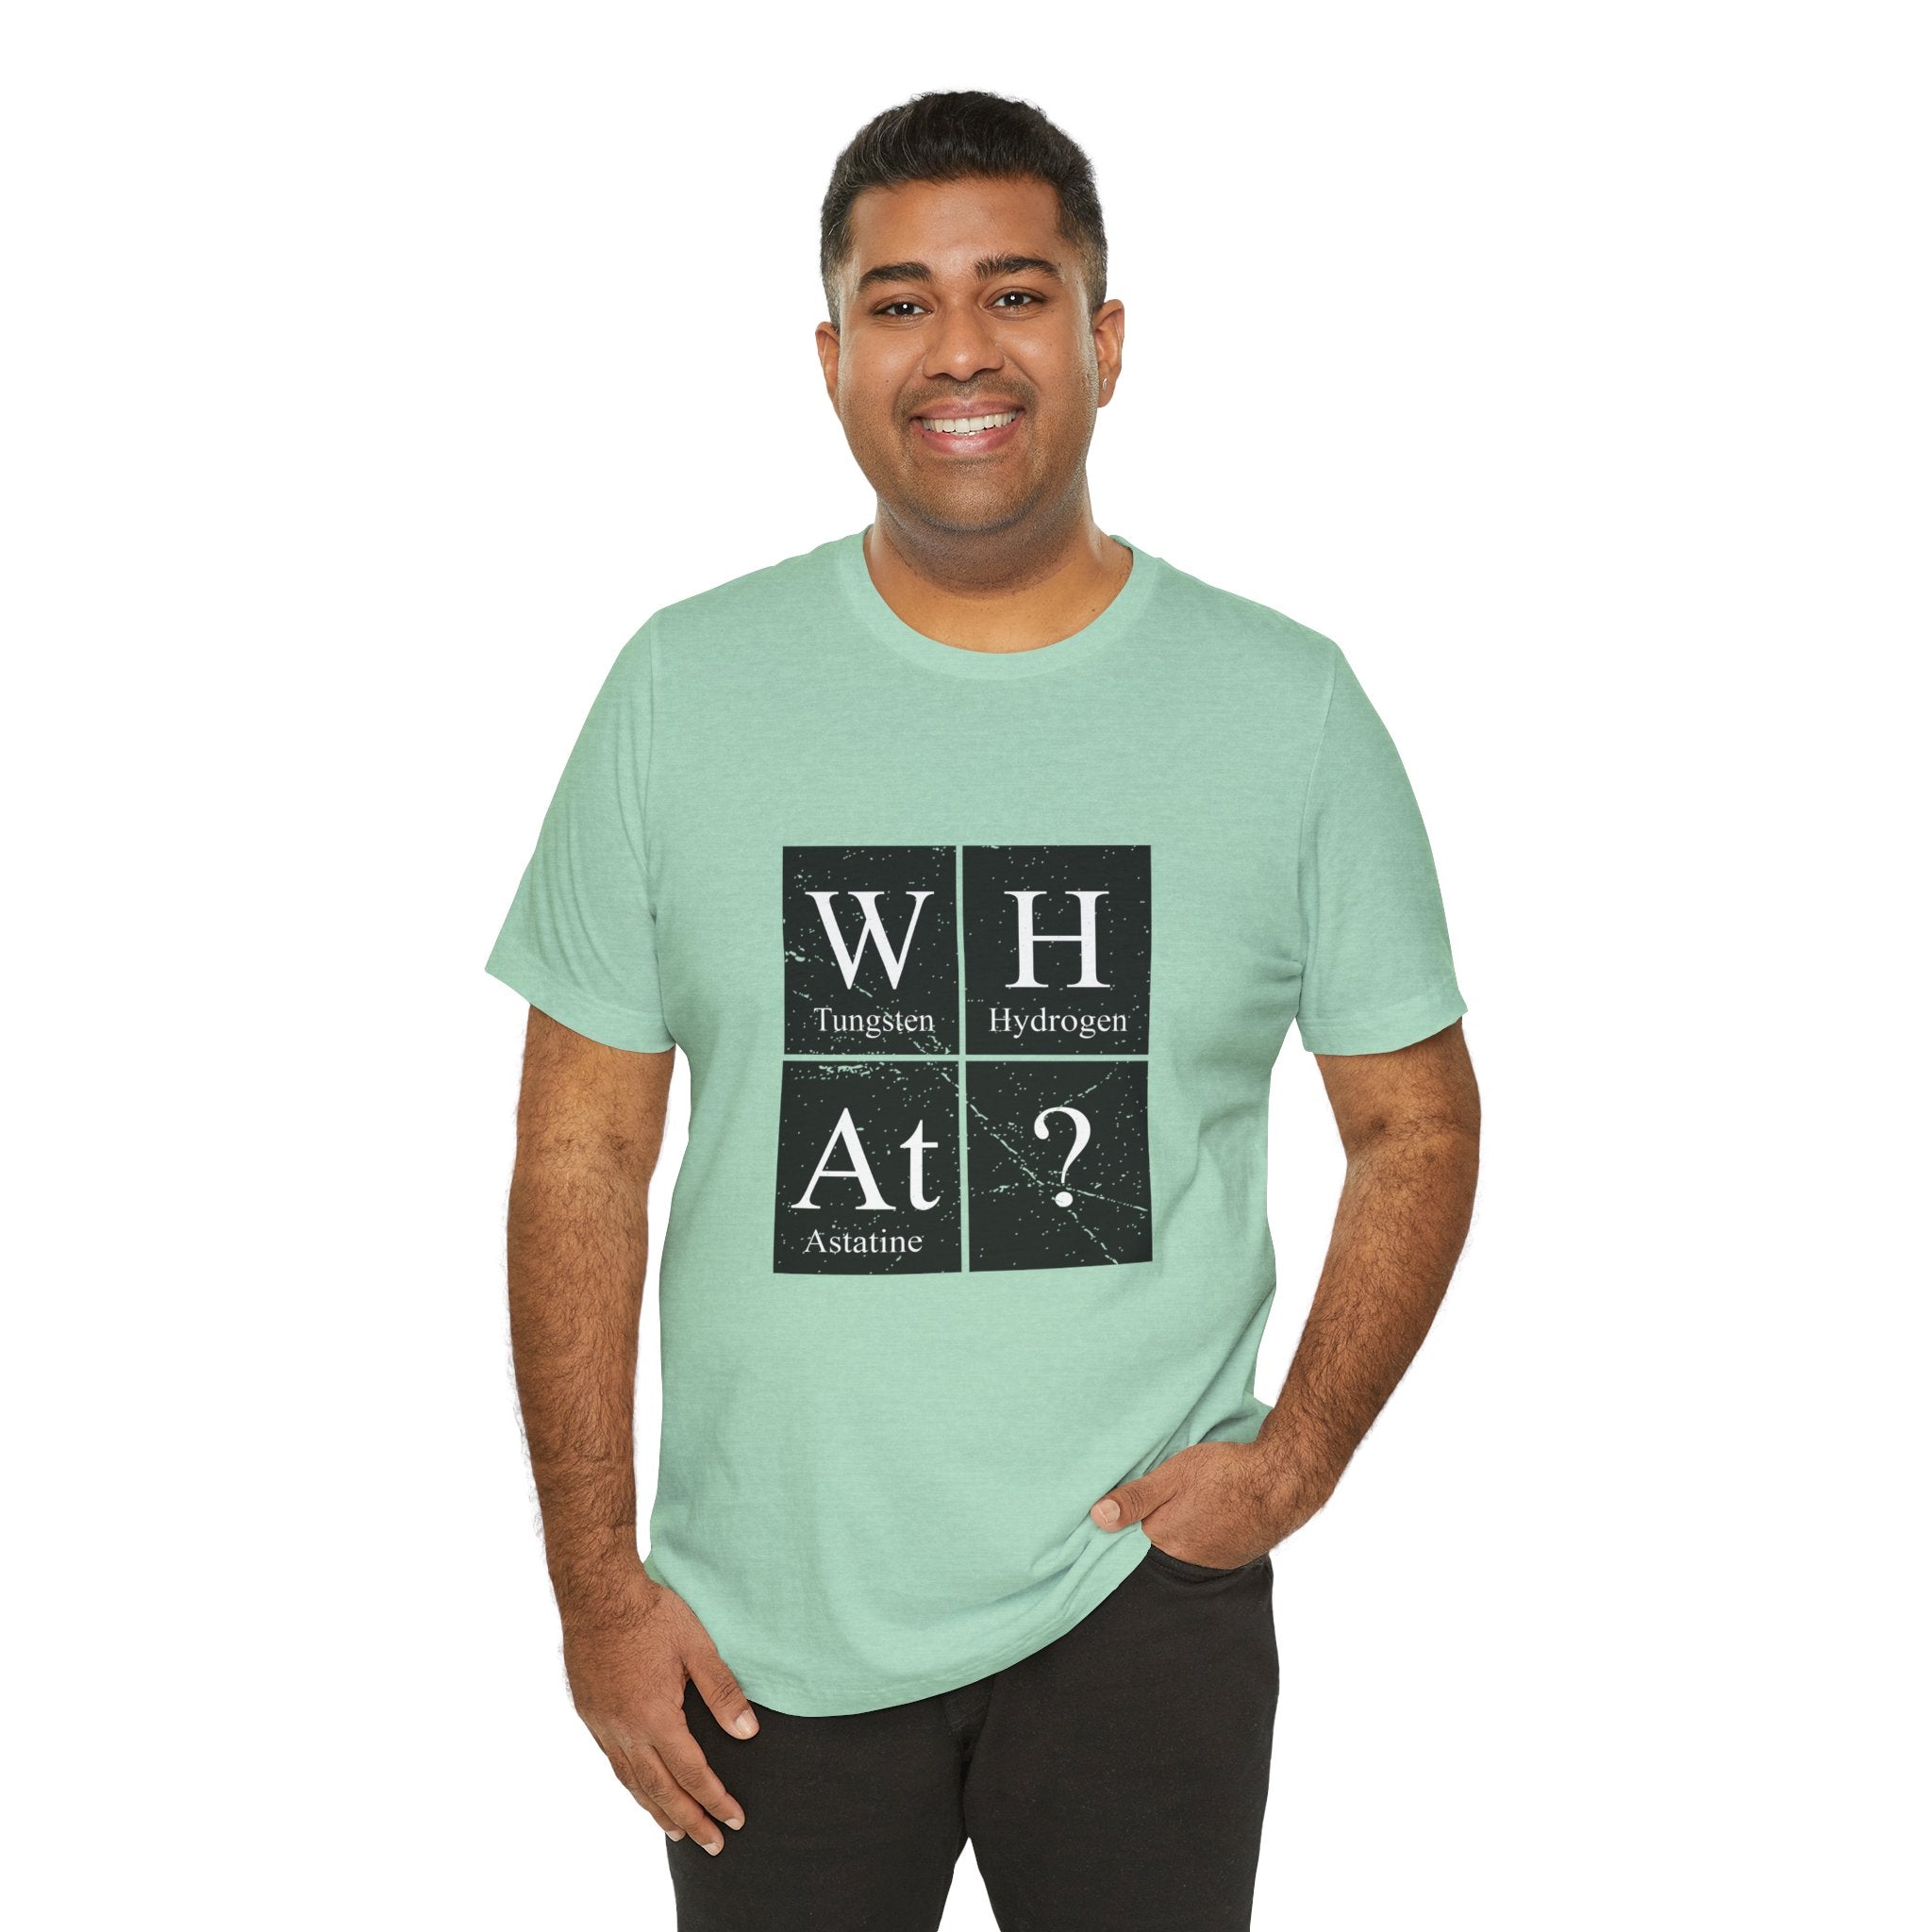 Man in a green unisex jersey tee with a W-H-At-? periodic table design, standing against a white background, smiling at the camera.